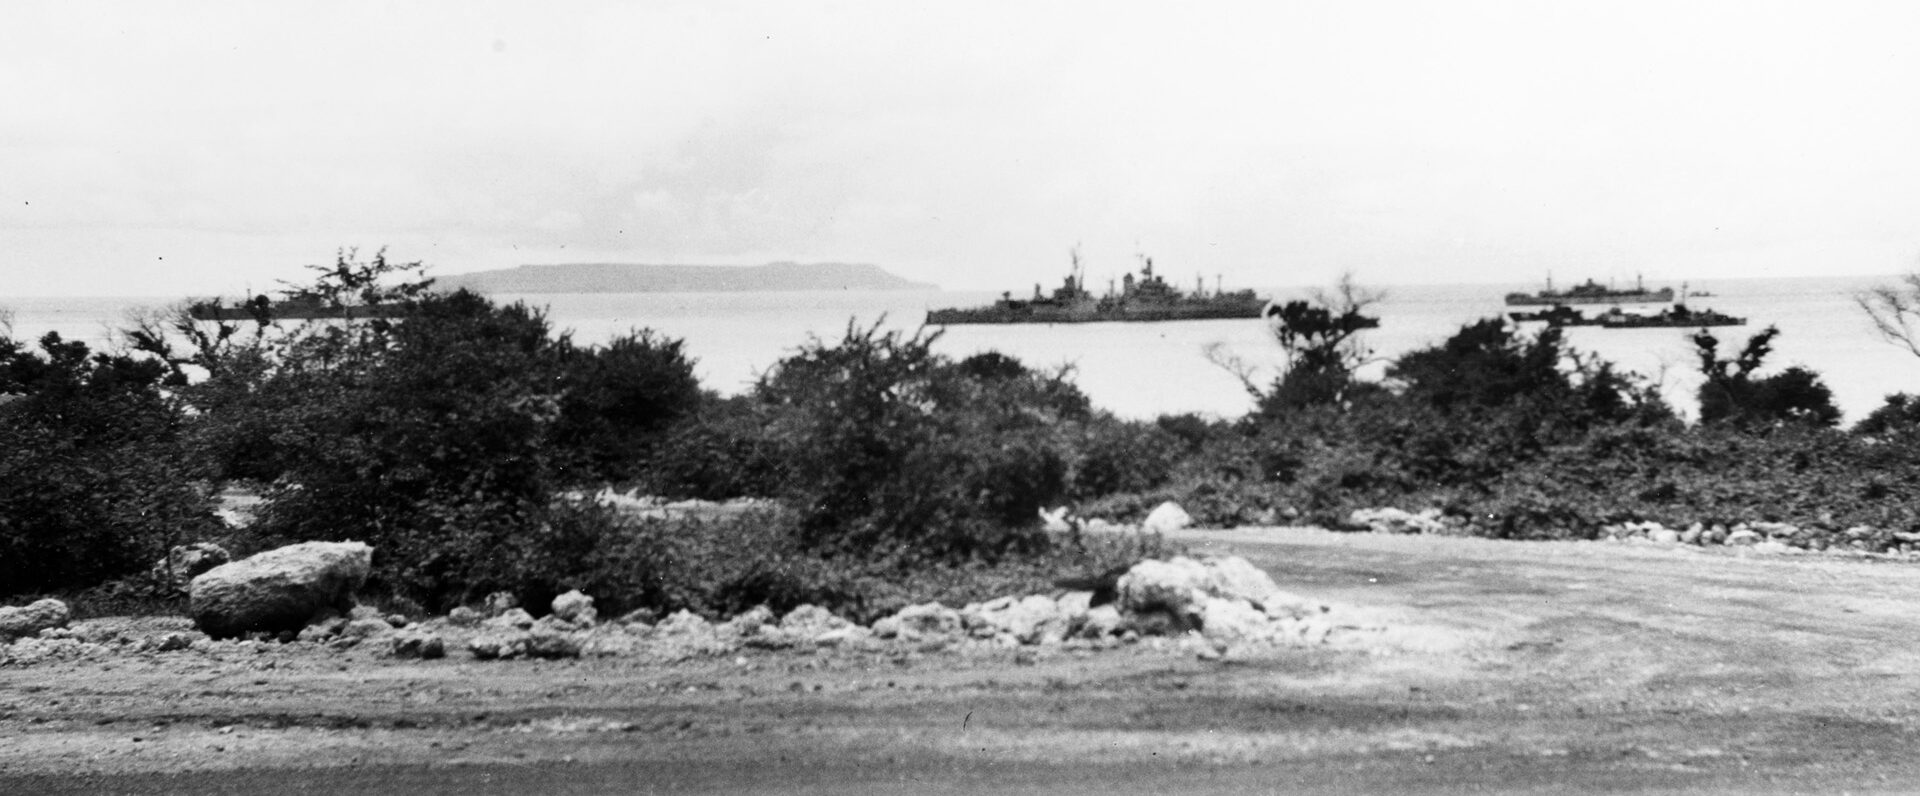 After delivering her cargo of secret components to Tinian Island for the atomic bomb that would be used on Hiroshima, the Indianapolis (center) departs for her trip to Guam—a voyage that was never completed.